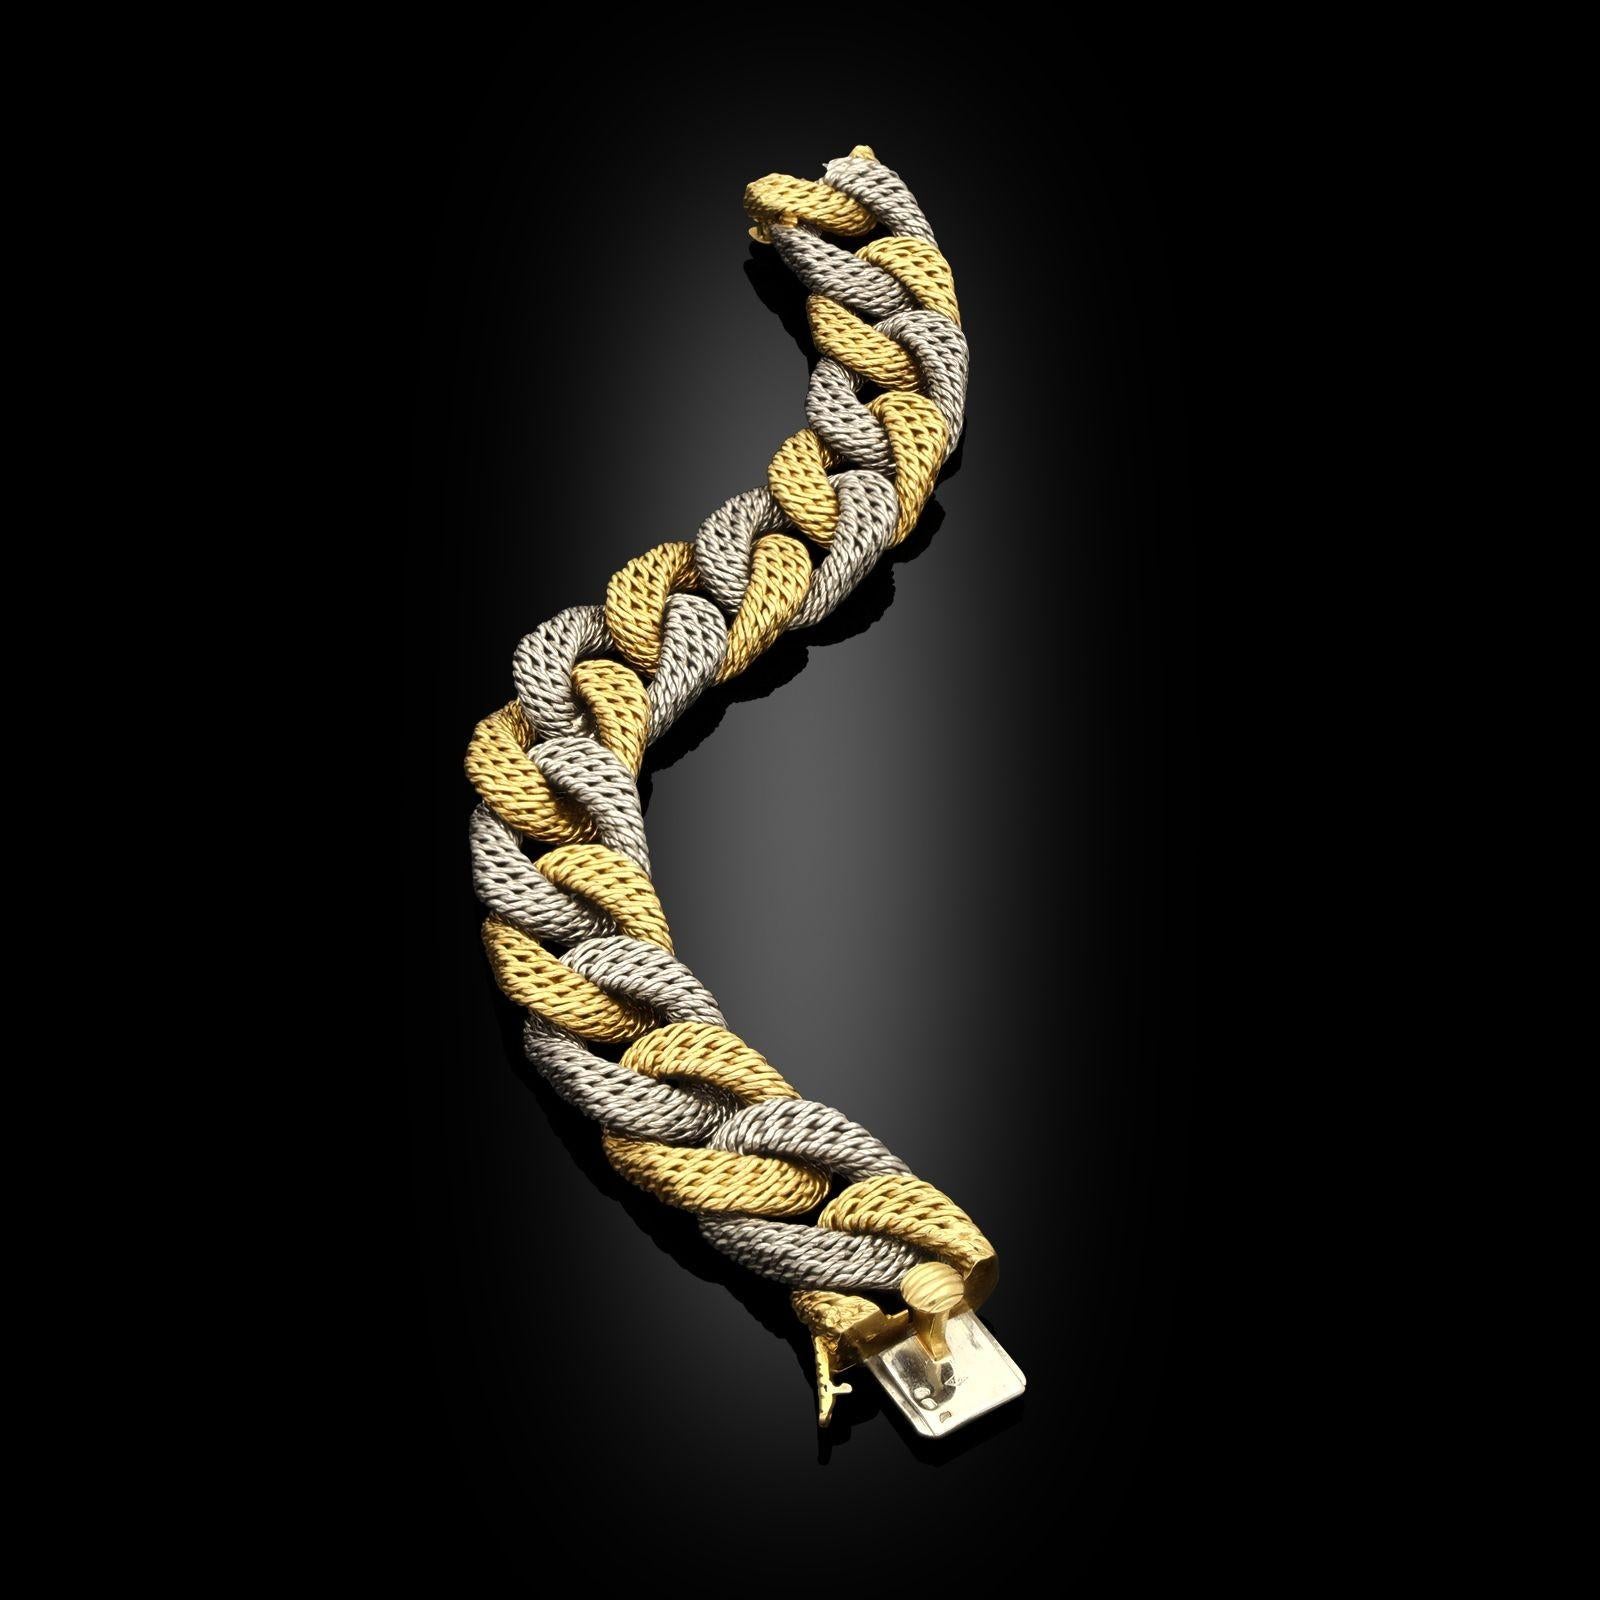 A bi-colour 18ct yellow gold and platinum oval mesh curb link bracelet by Georges Lenfant. The bracelet is composed of oval curb links in an alternating colour pattern with a concealed tongue and box clasp.
Maker
Georges Lenfant
Period
circa